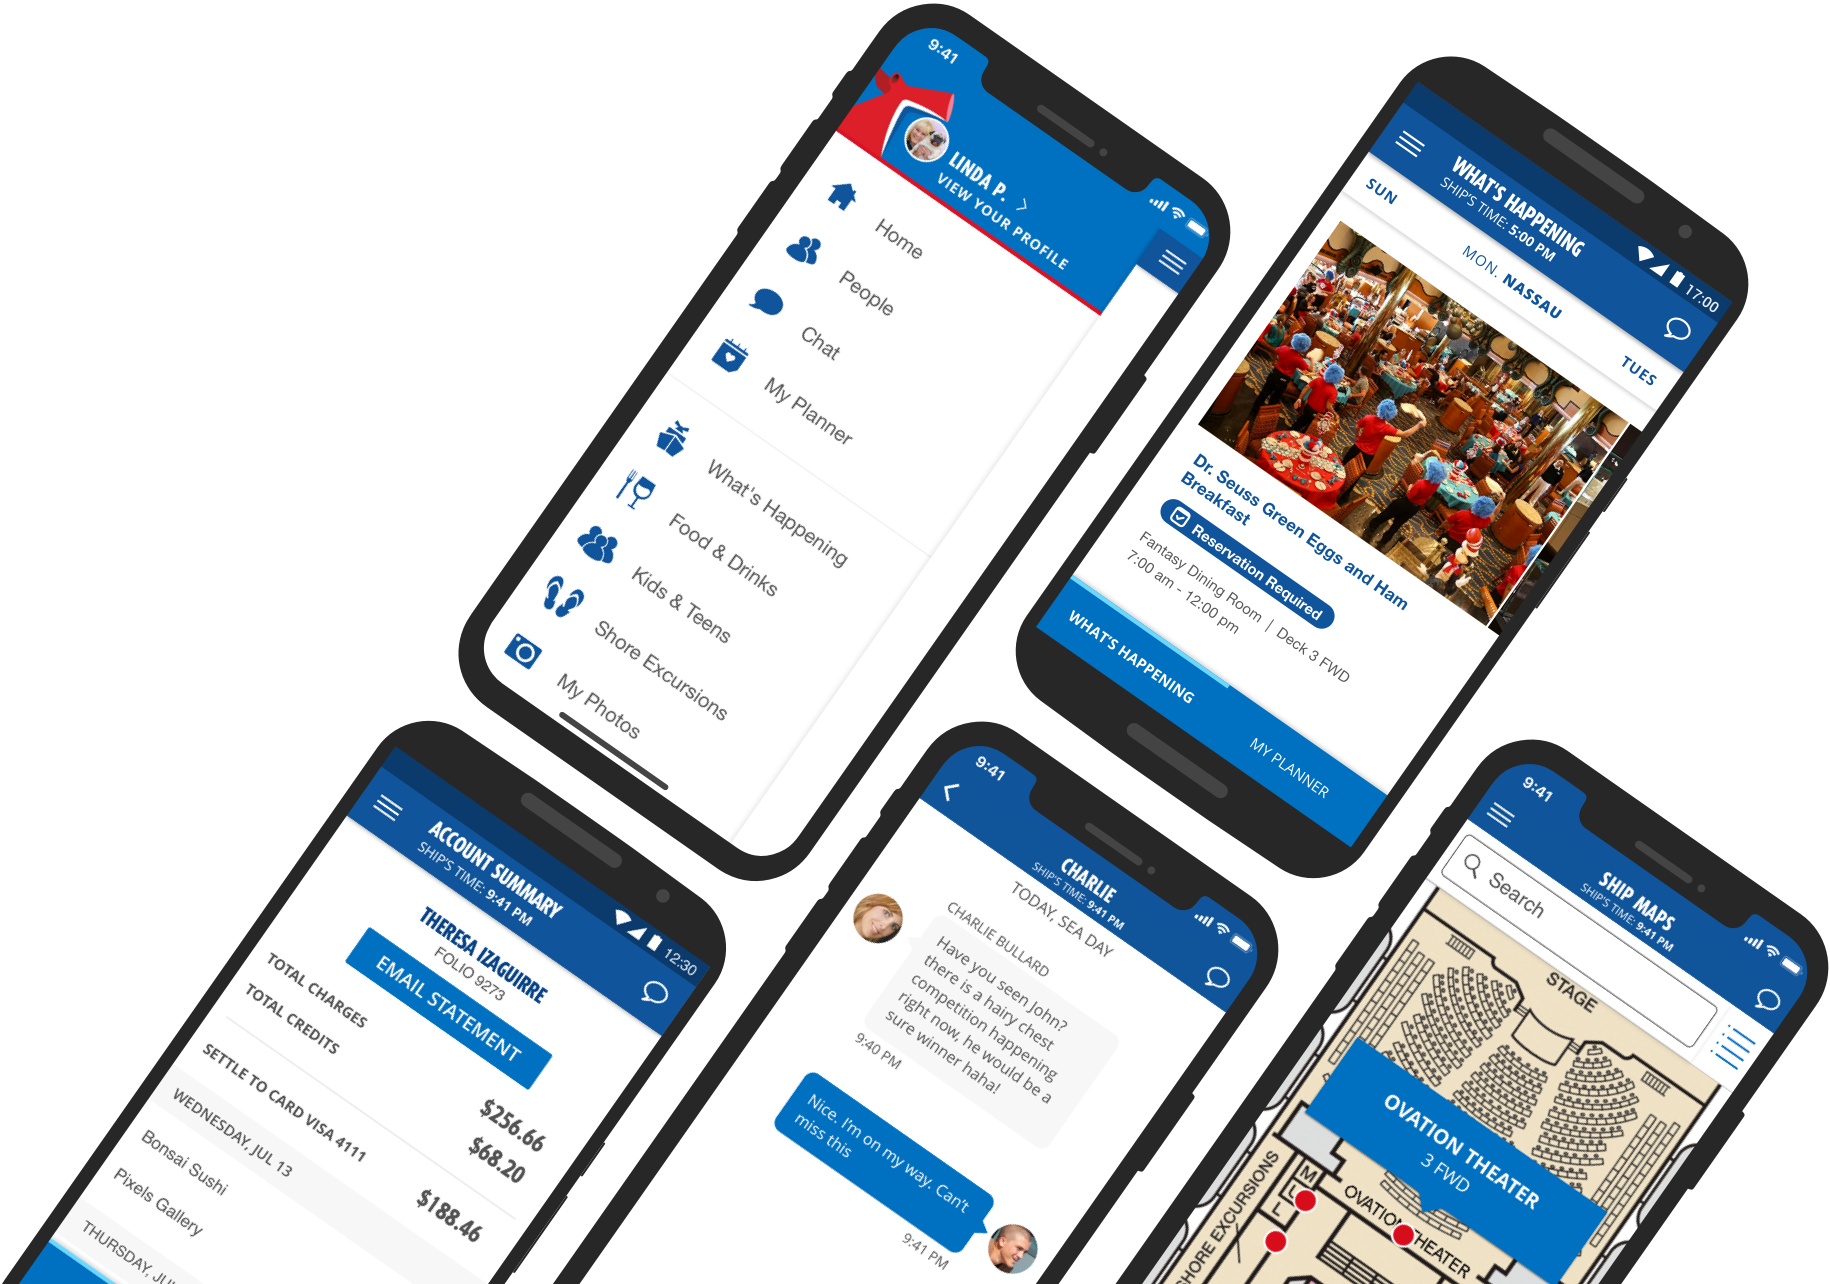 A grid of smartphones displaying various screens from the Carnival HUB App, including the Side Menu, What's Happening page, Account Summary page, Chat page, and Ship Maps page.